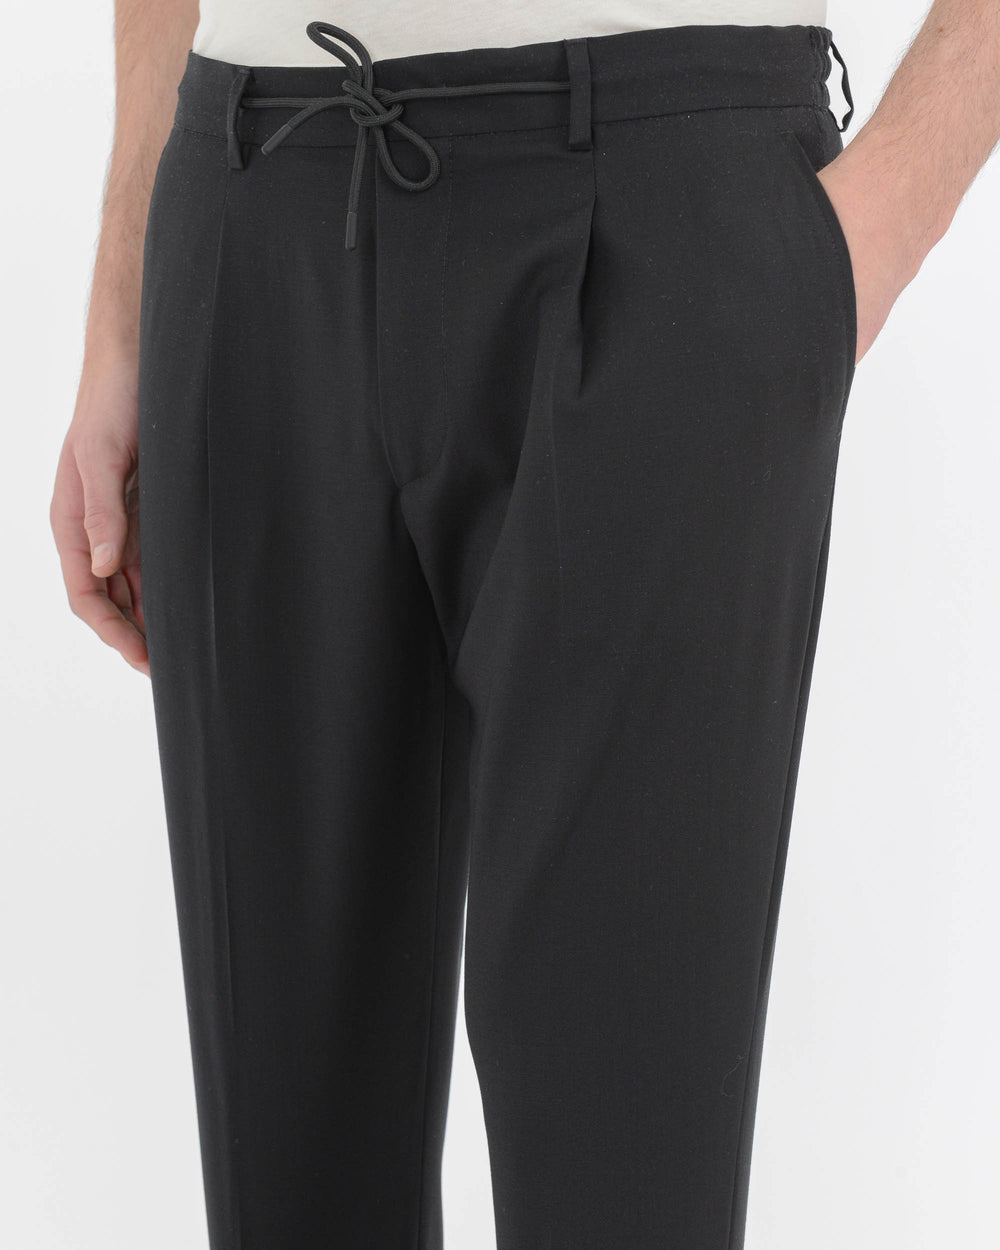 black stretch wool canvas jogging trousers